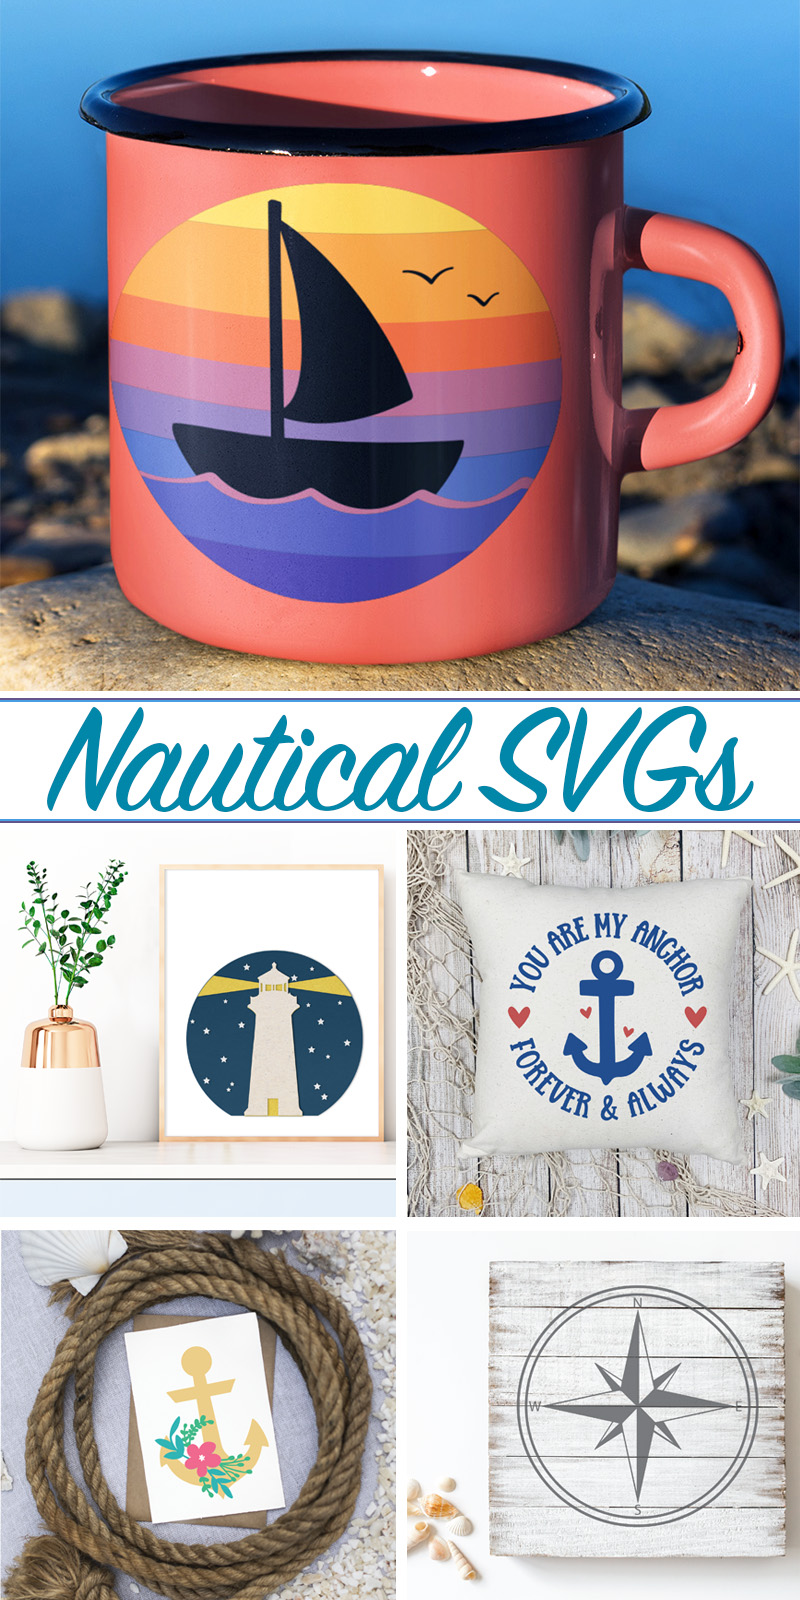 Nautical SVG Files - for Cricut Projects